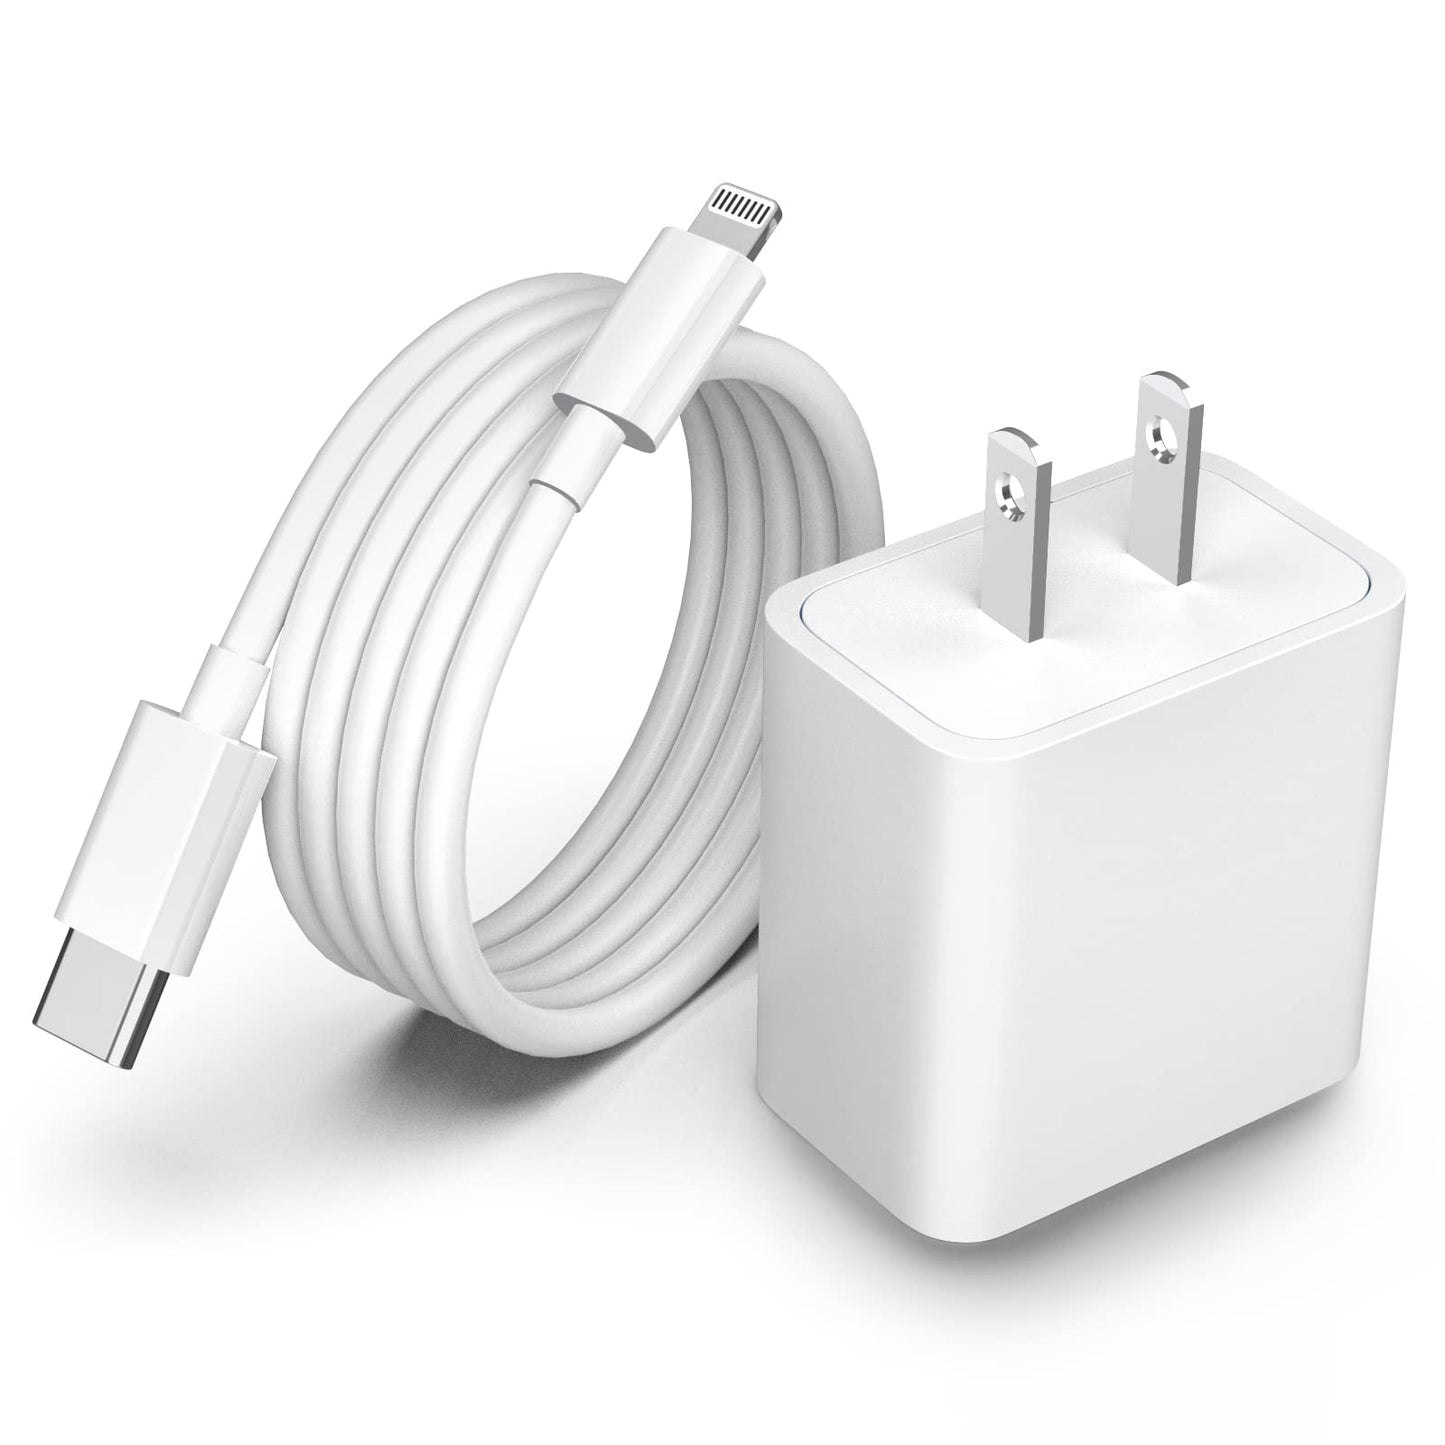 Apple 20W Fast Charger 100%Original Apple Charger with Box